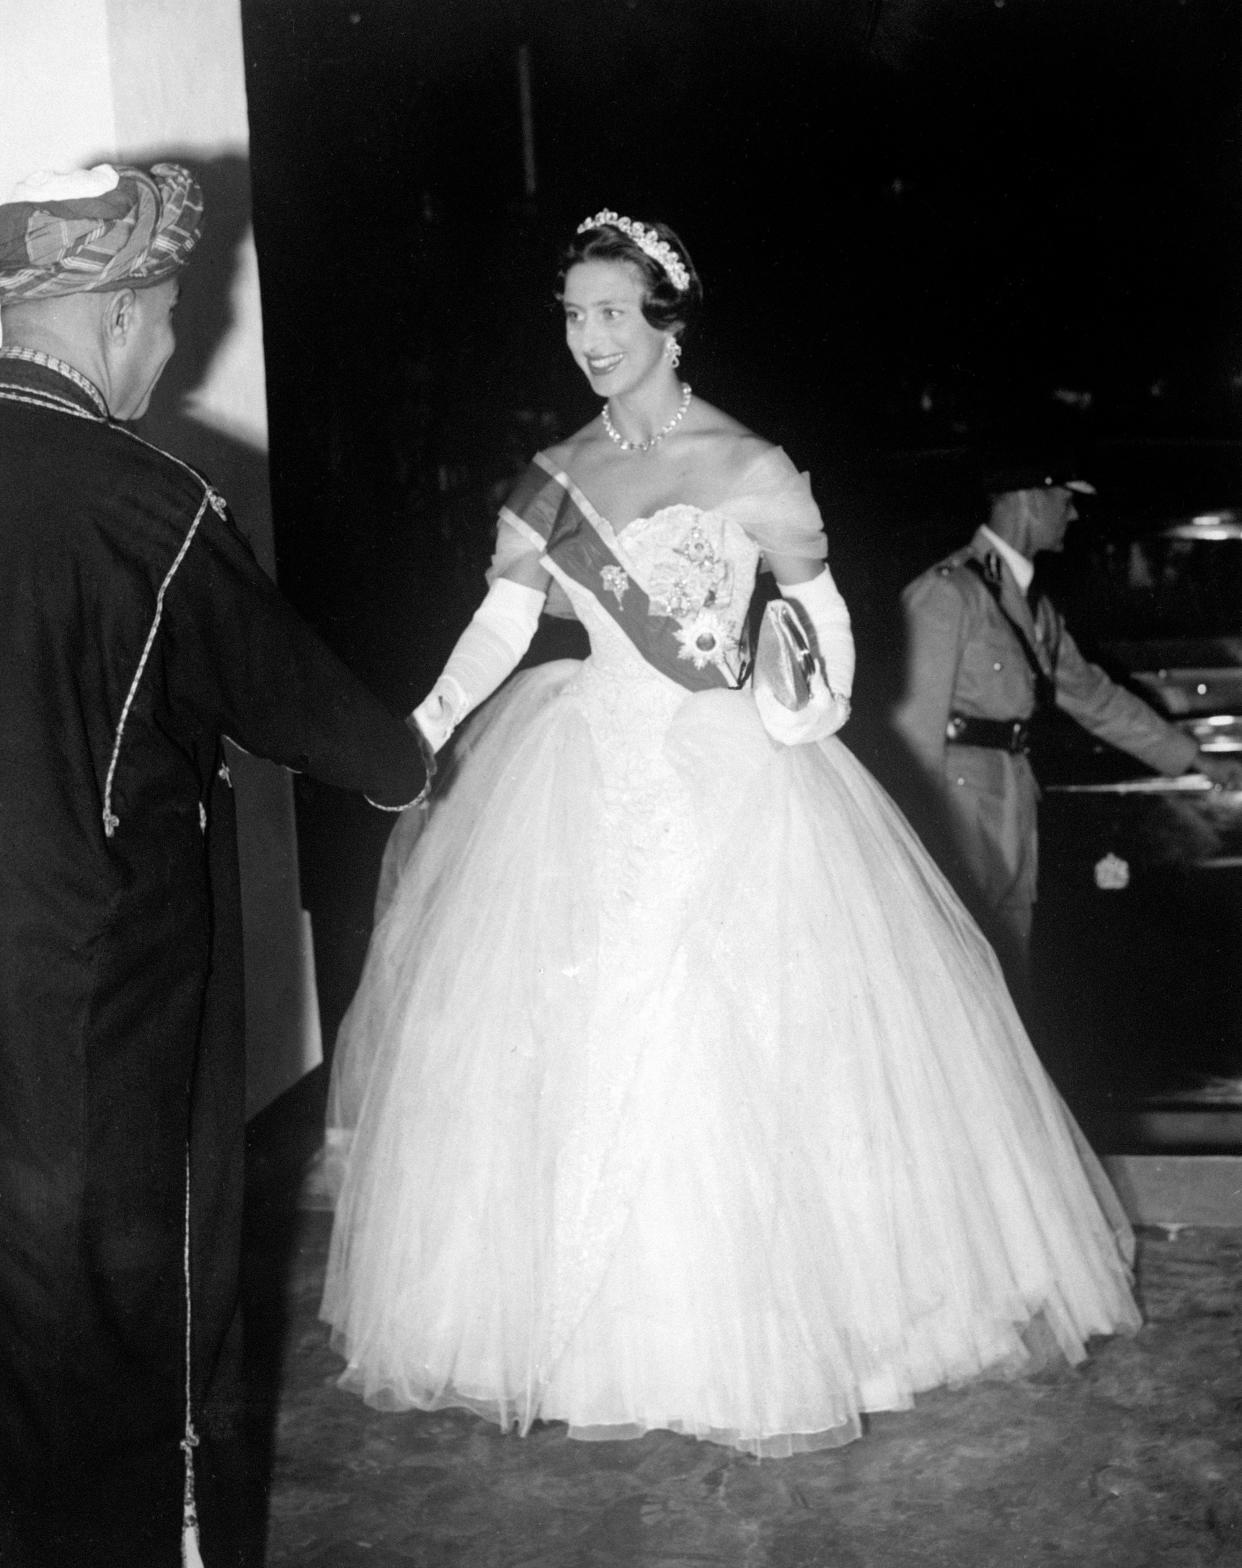 Princess Margaret wearing the Cartier Halo Tiara at the Sultan of Zanzibar's Royal Palace during her East African Tour in 1956. (Getty Images)